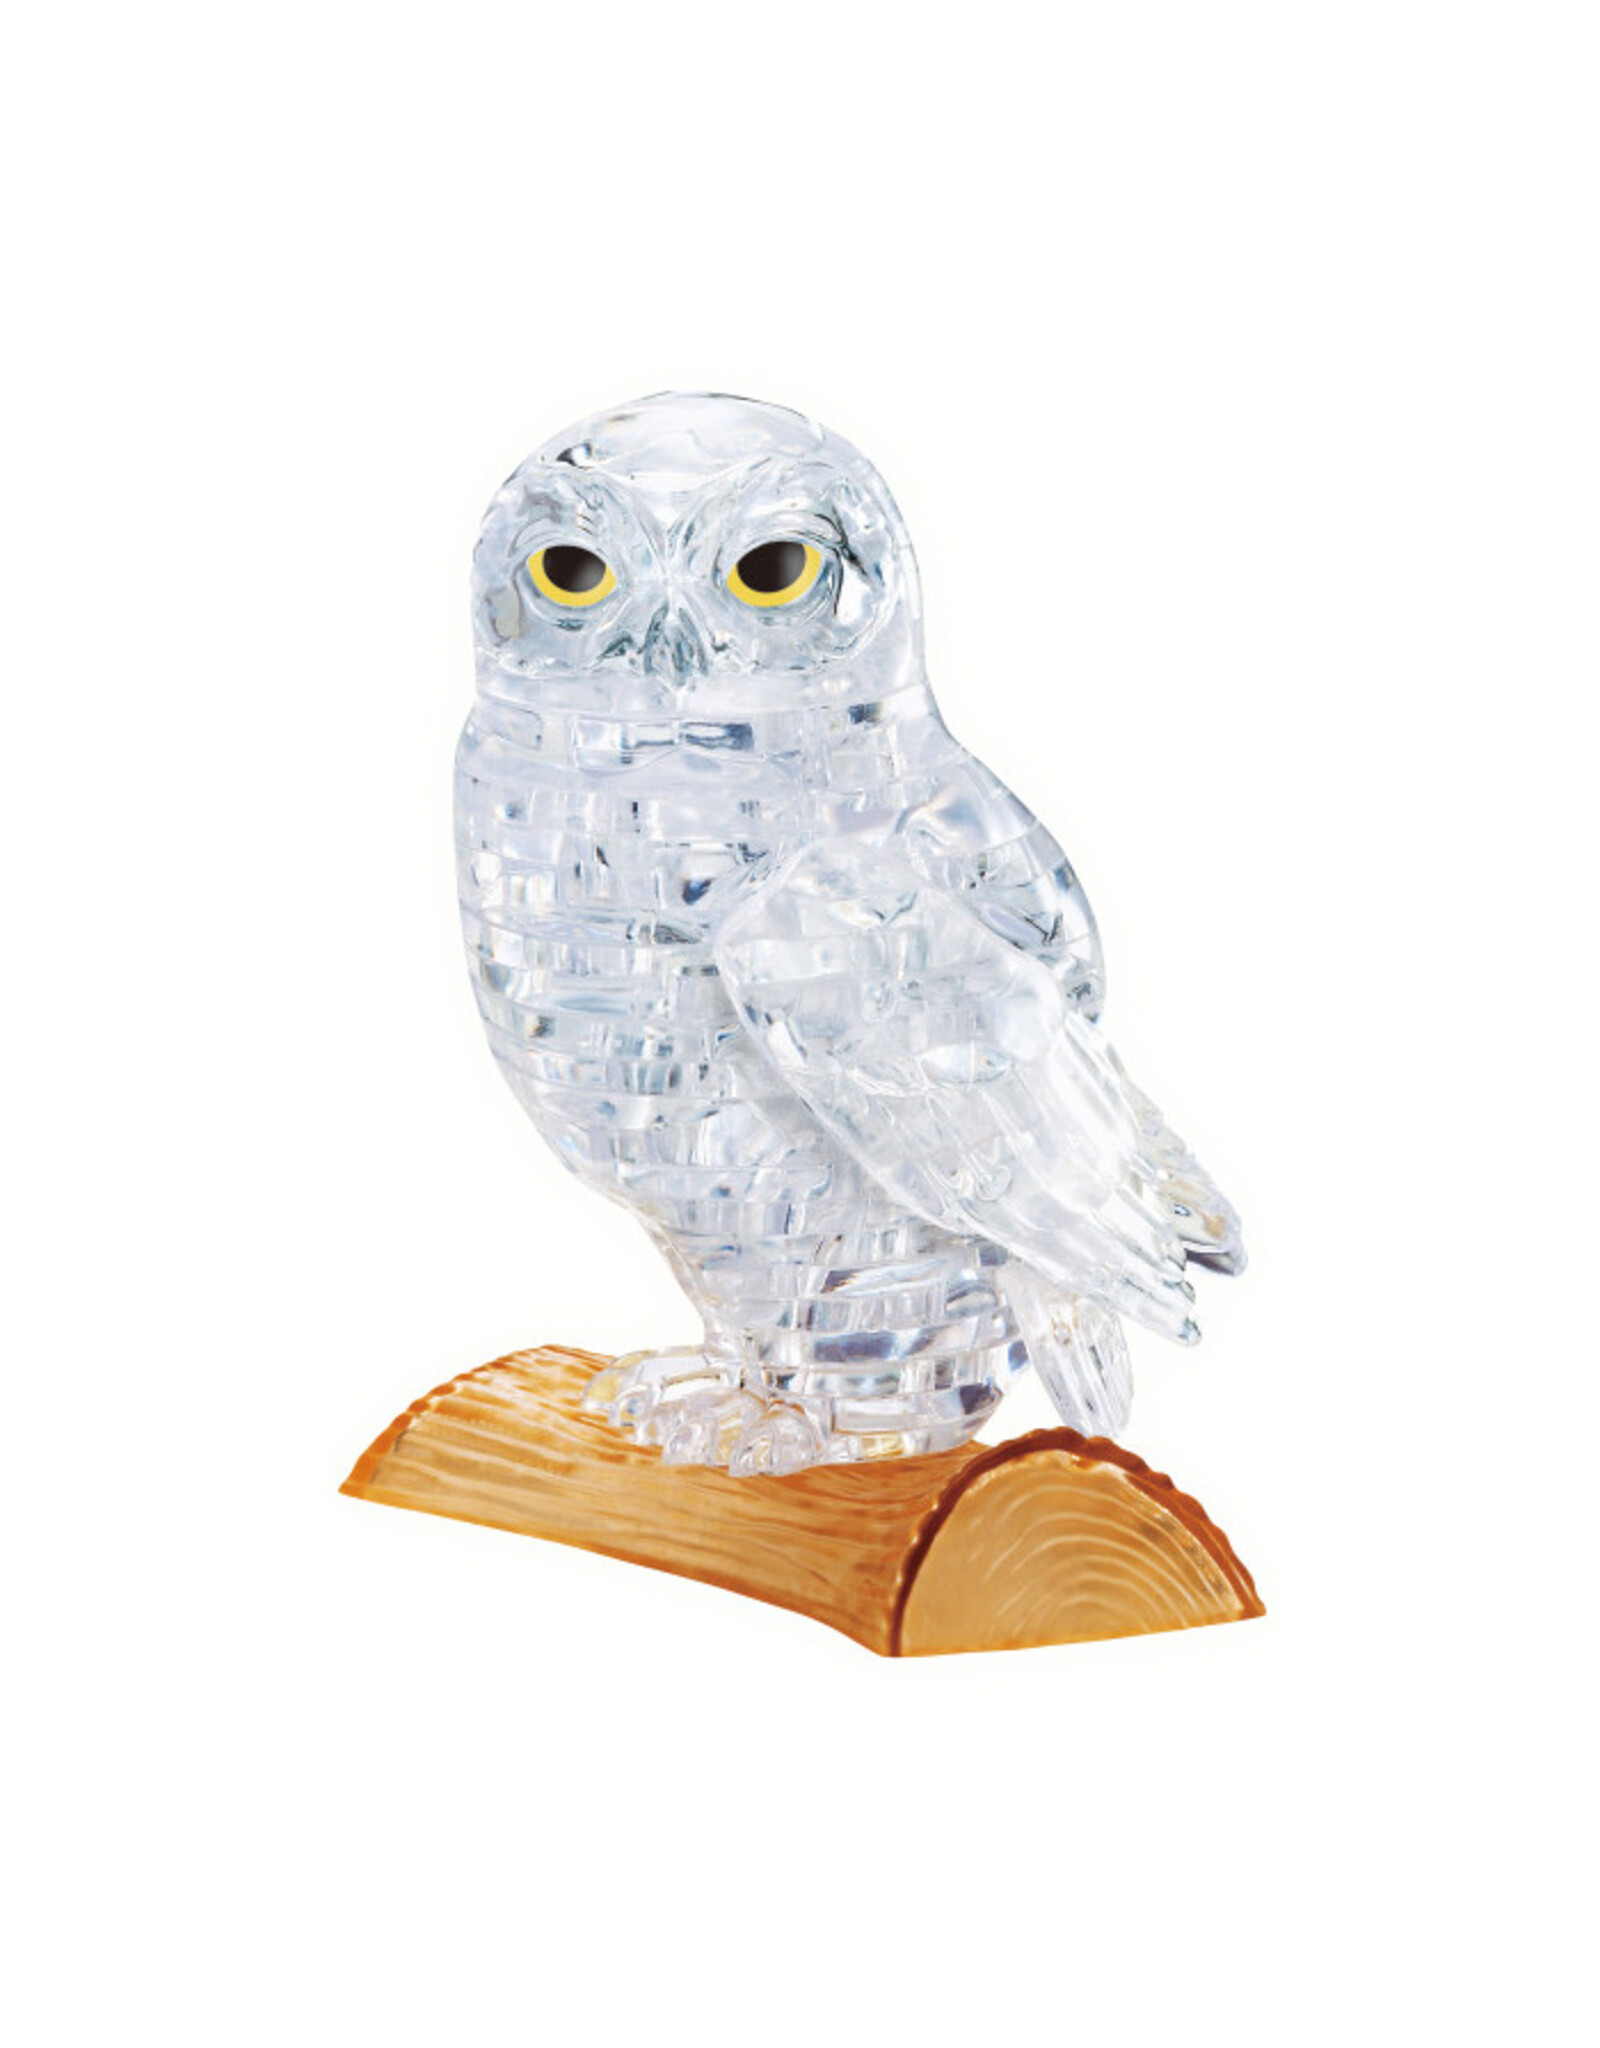 University Games Puzzle: 3D Crystal: Owl (WH)